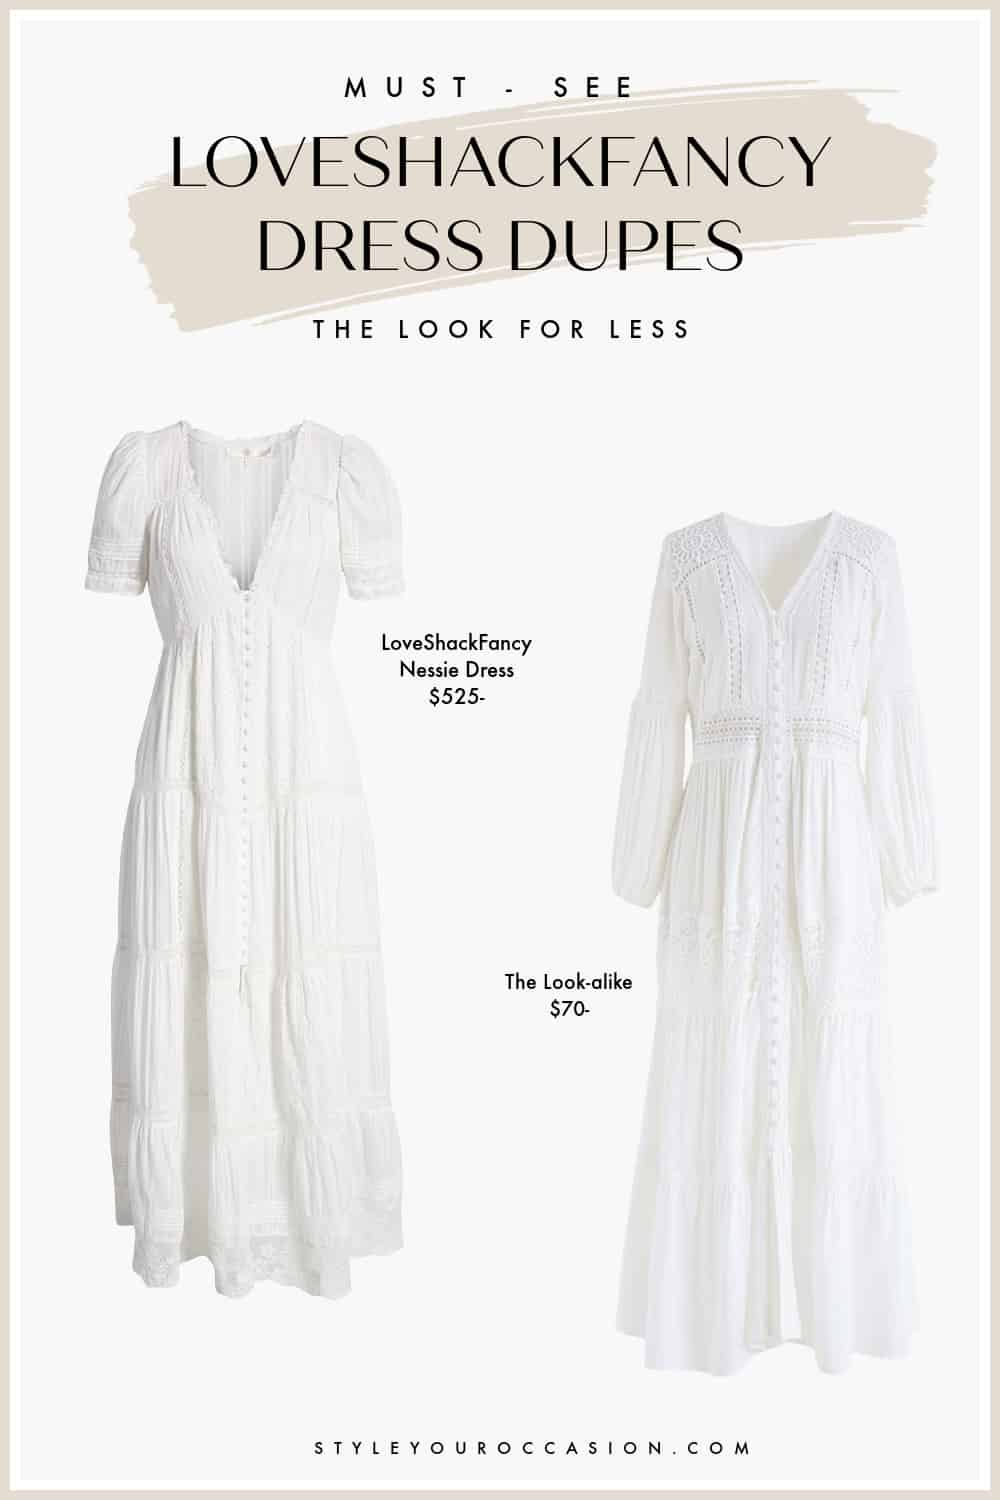 image comparing two white maxi embroidered eyelet dresses, one from LoveShackFancy, the other a dupe from Chicwish